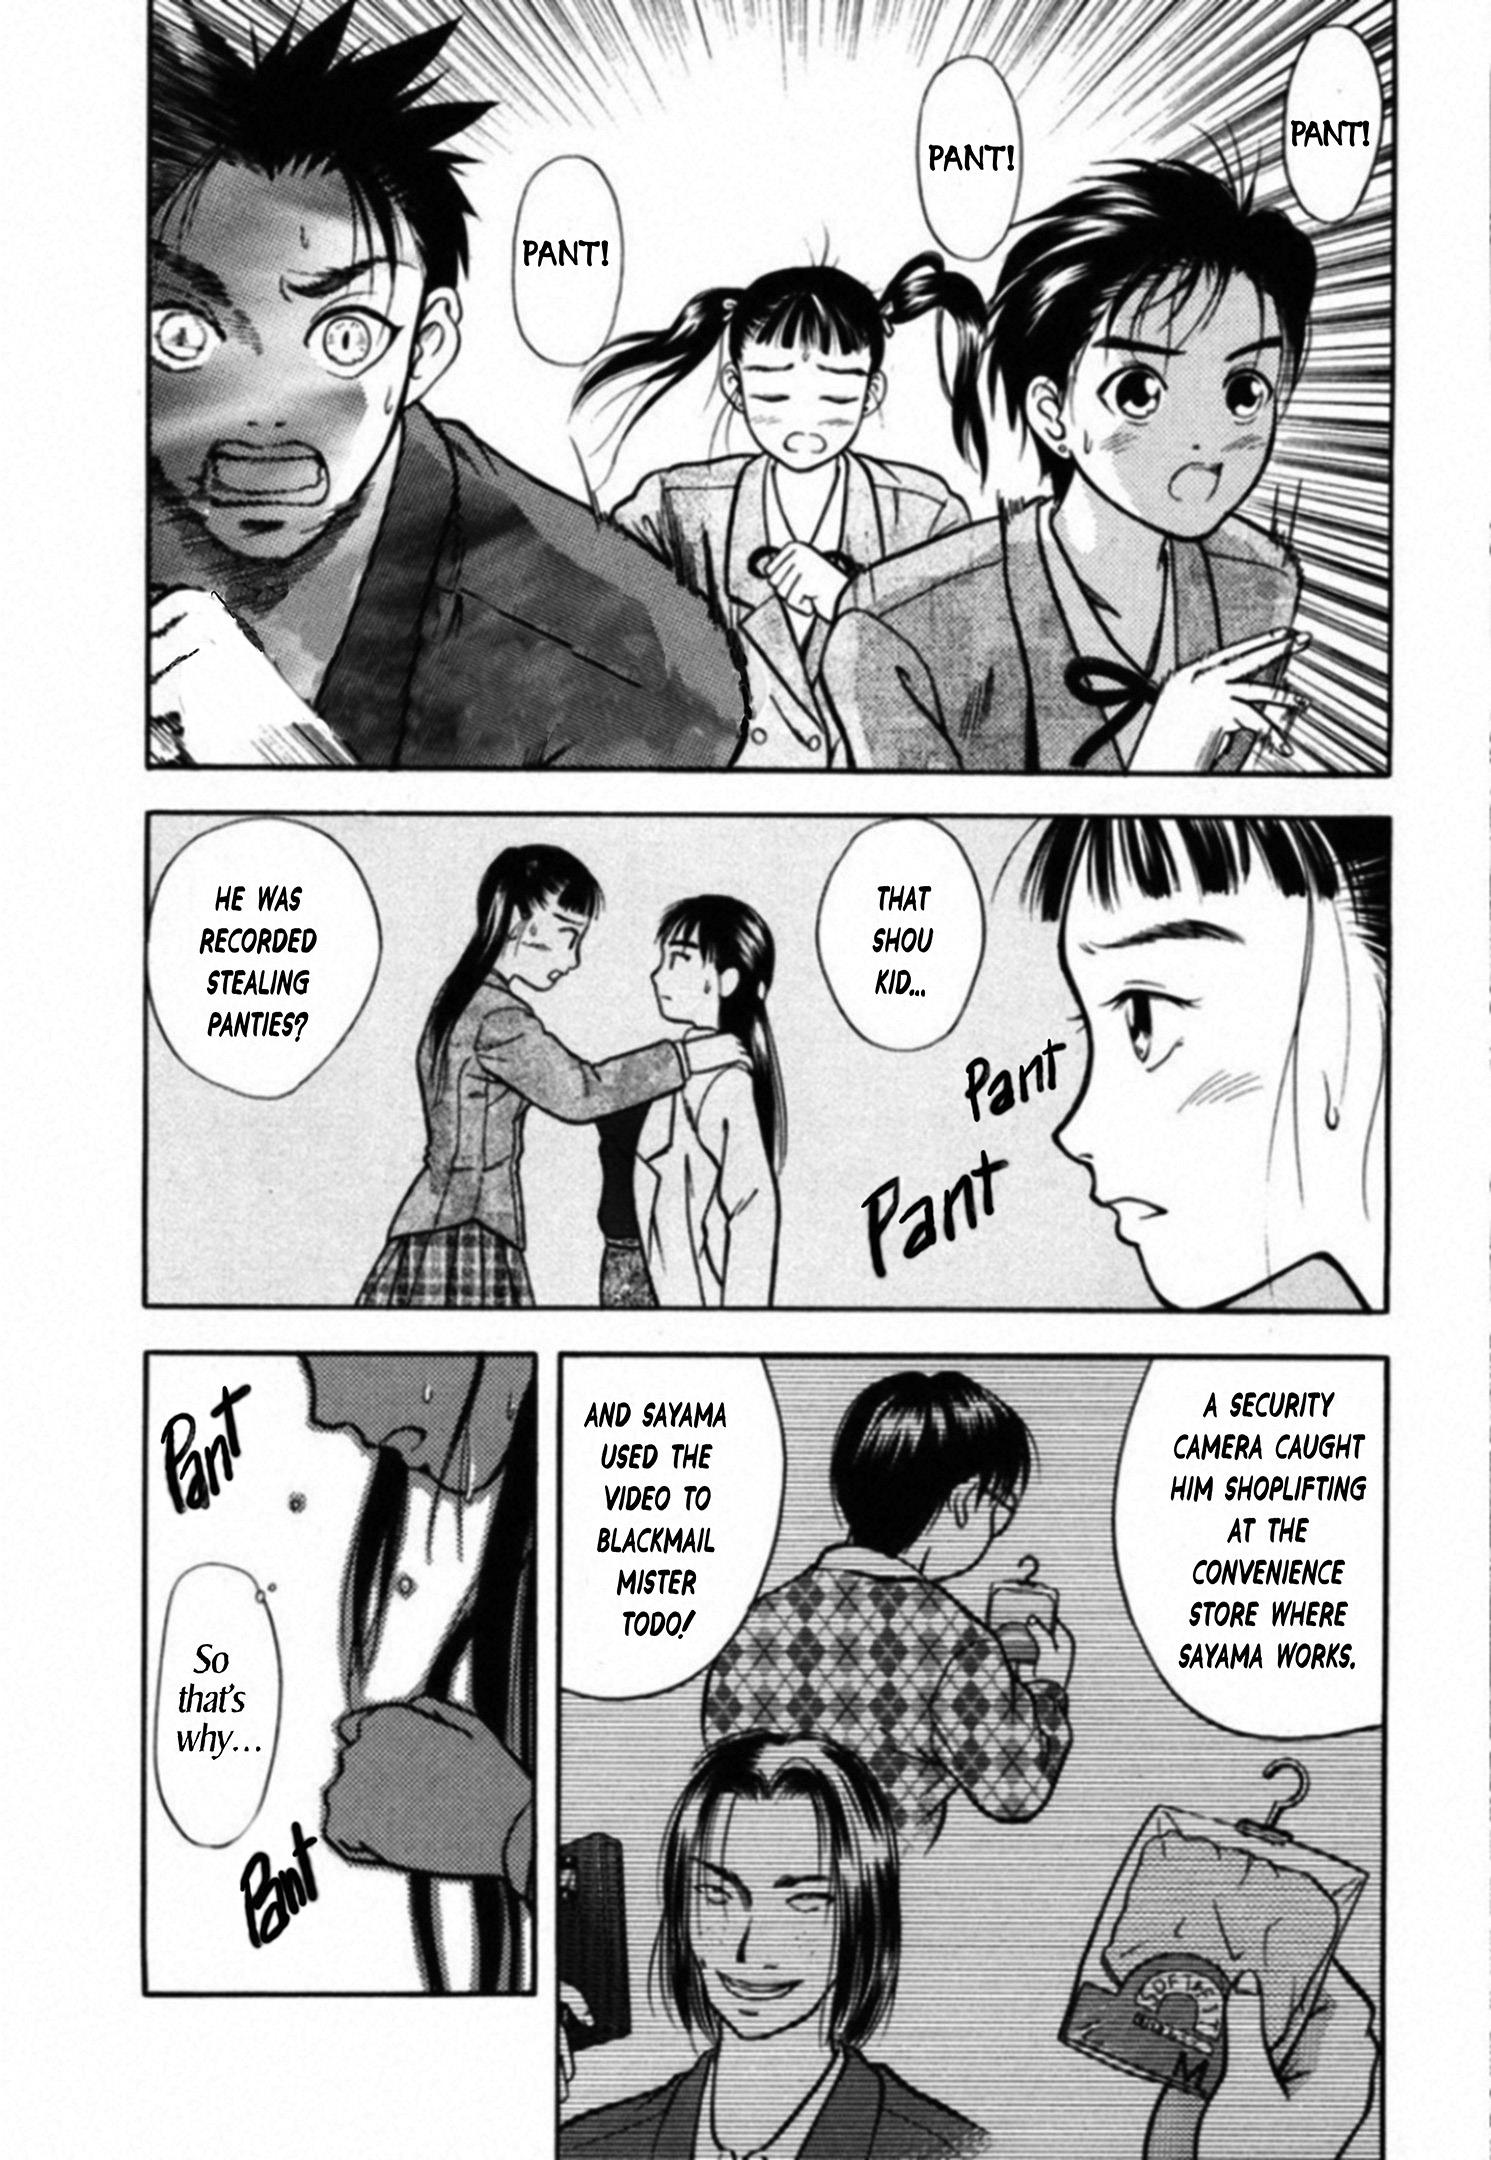 Kakeru Vol.3 Chapter 34: Out Of Sight - 9 - Picture 1